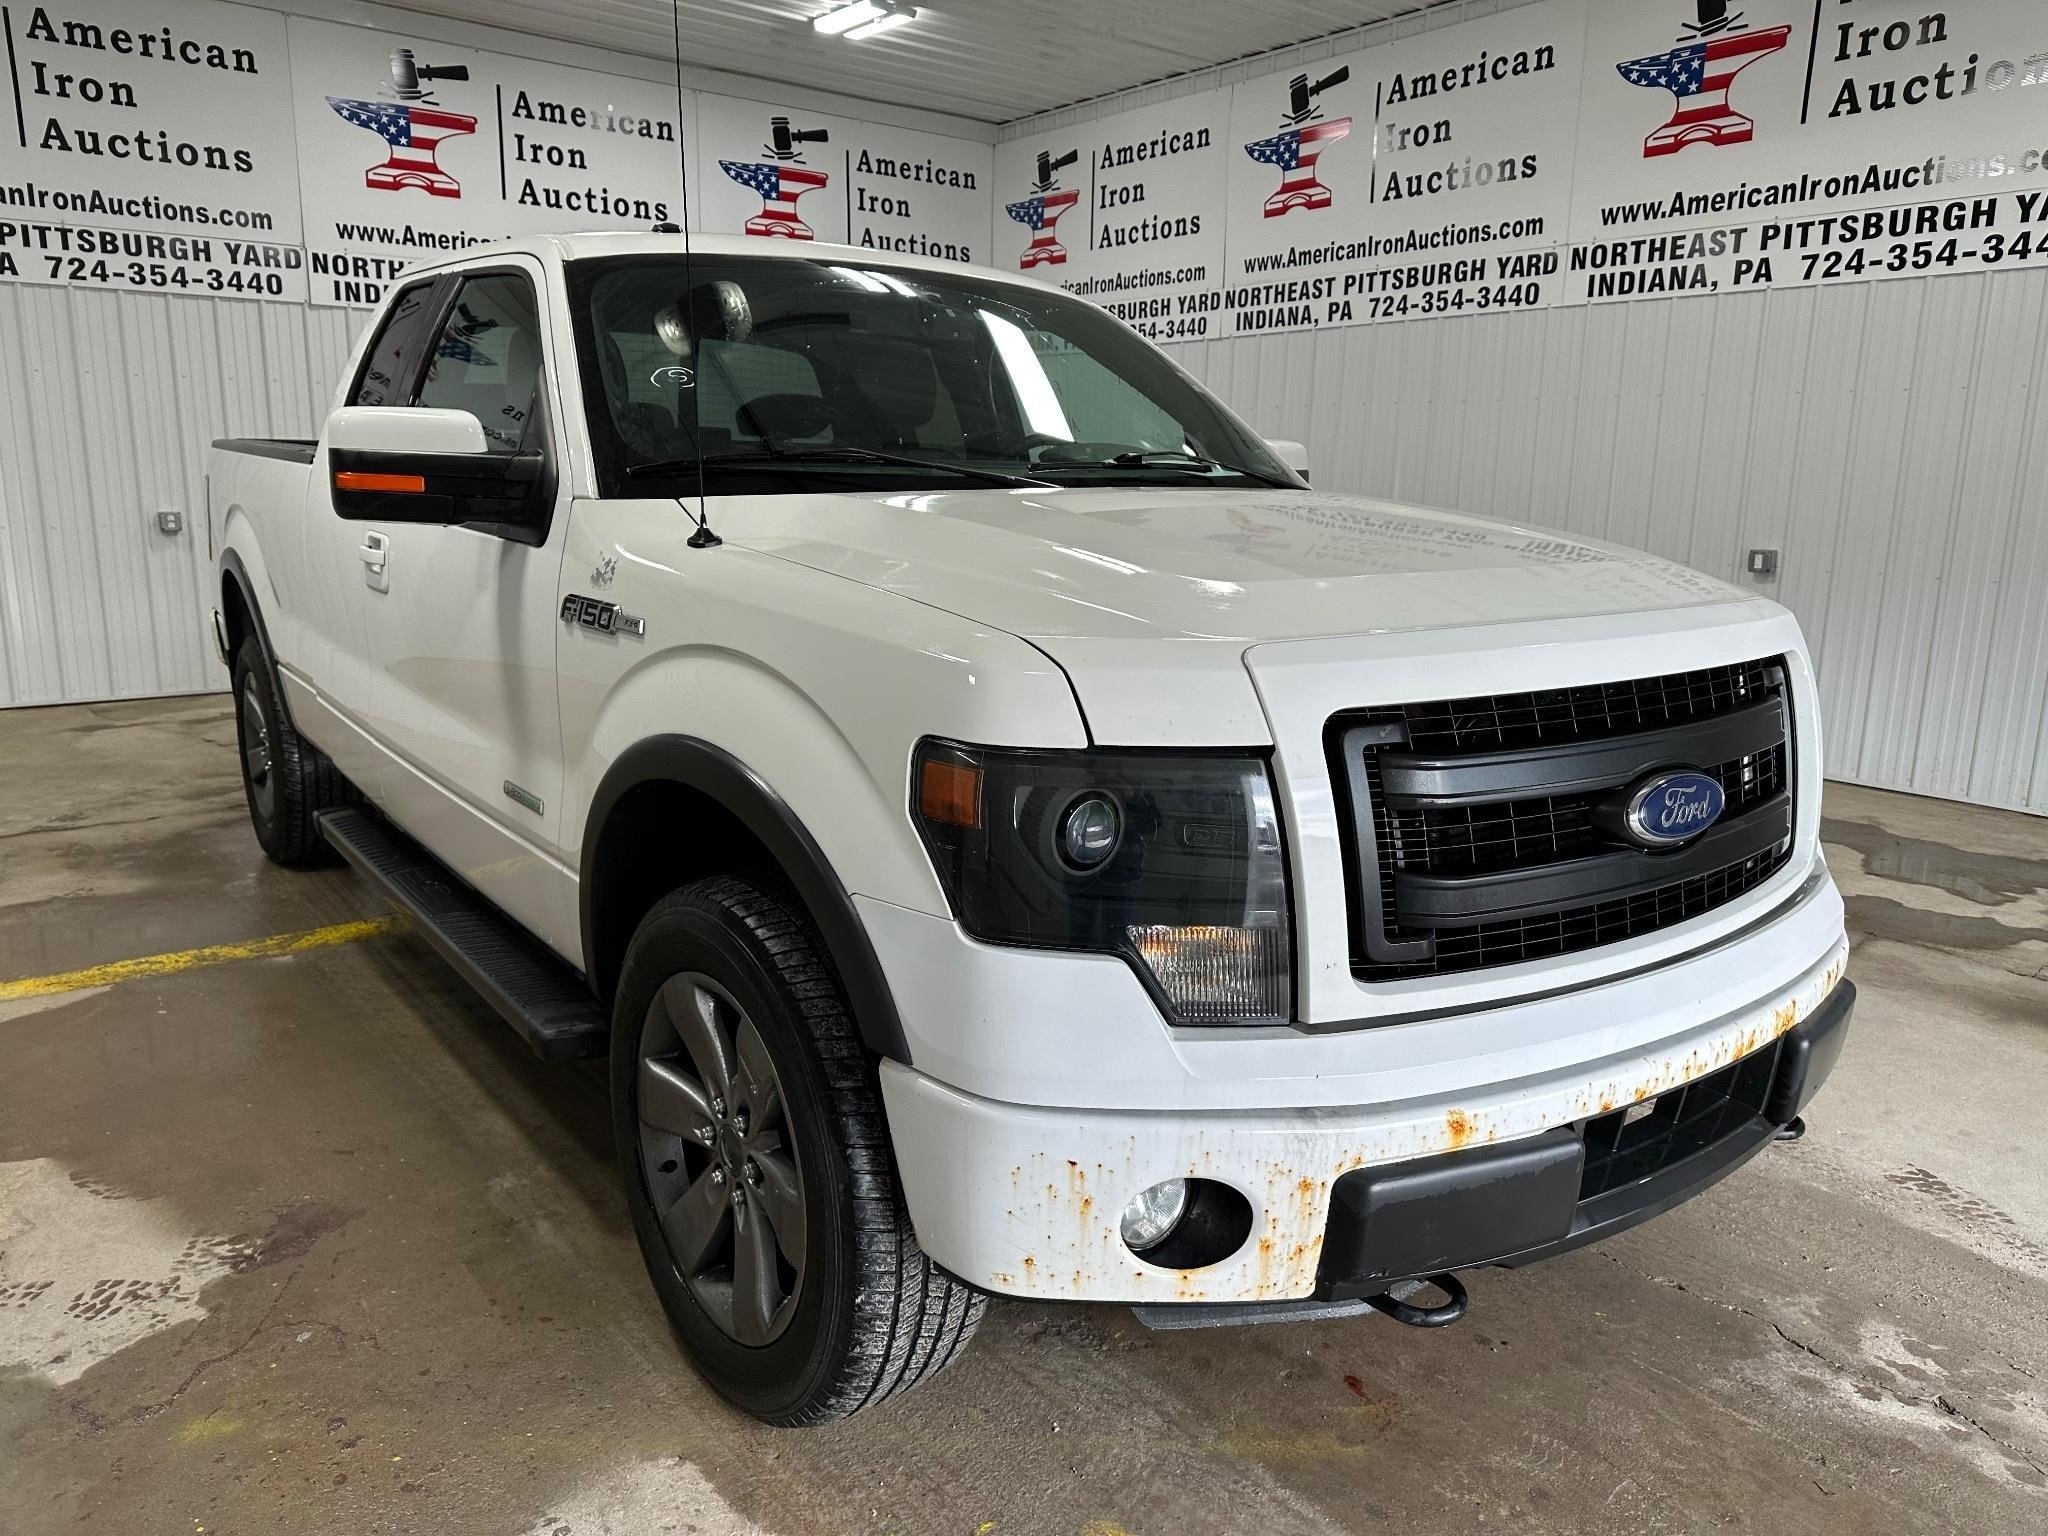 2014 Ford F150 FX4 Truck- Titled-NO RESERVE